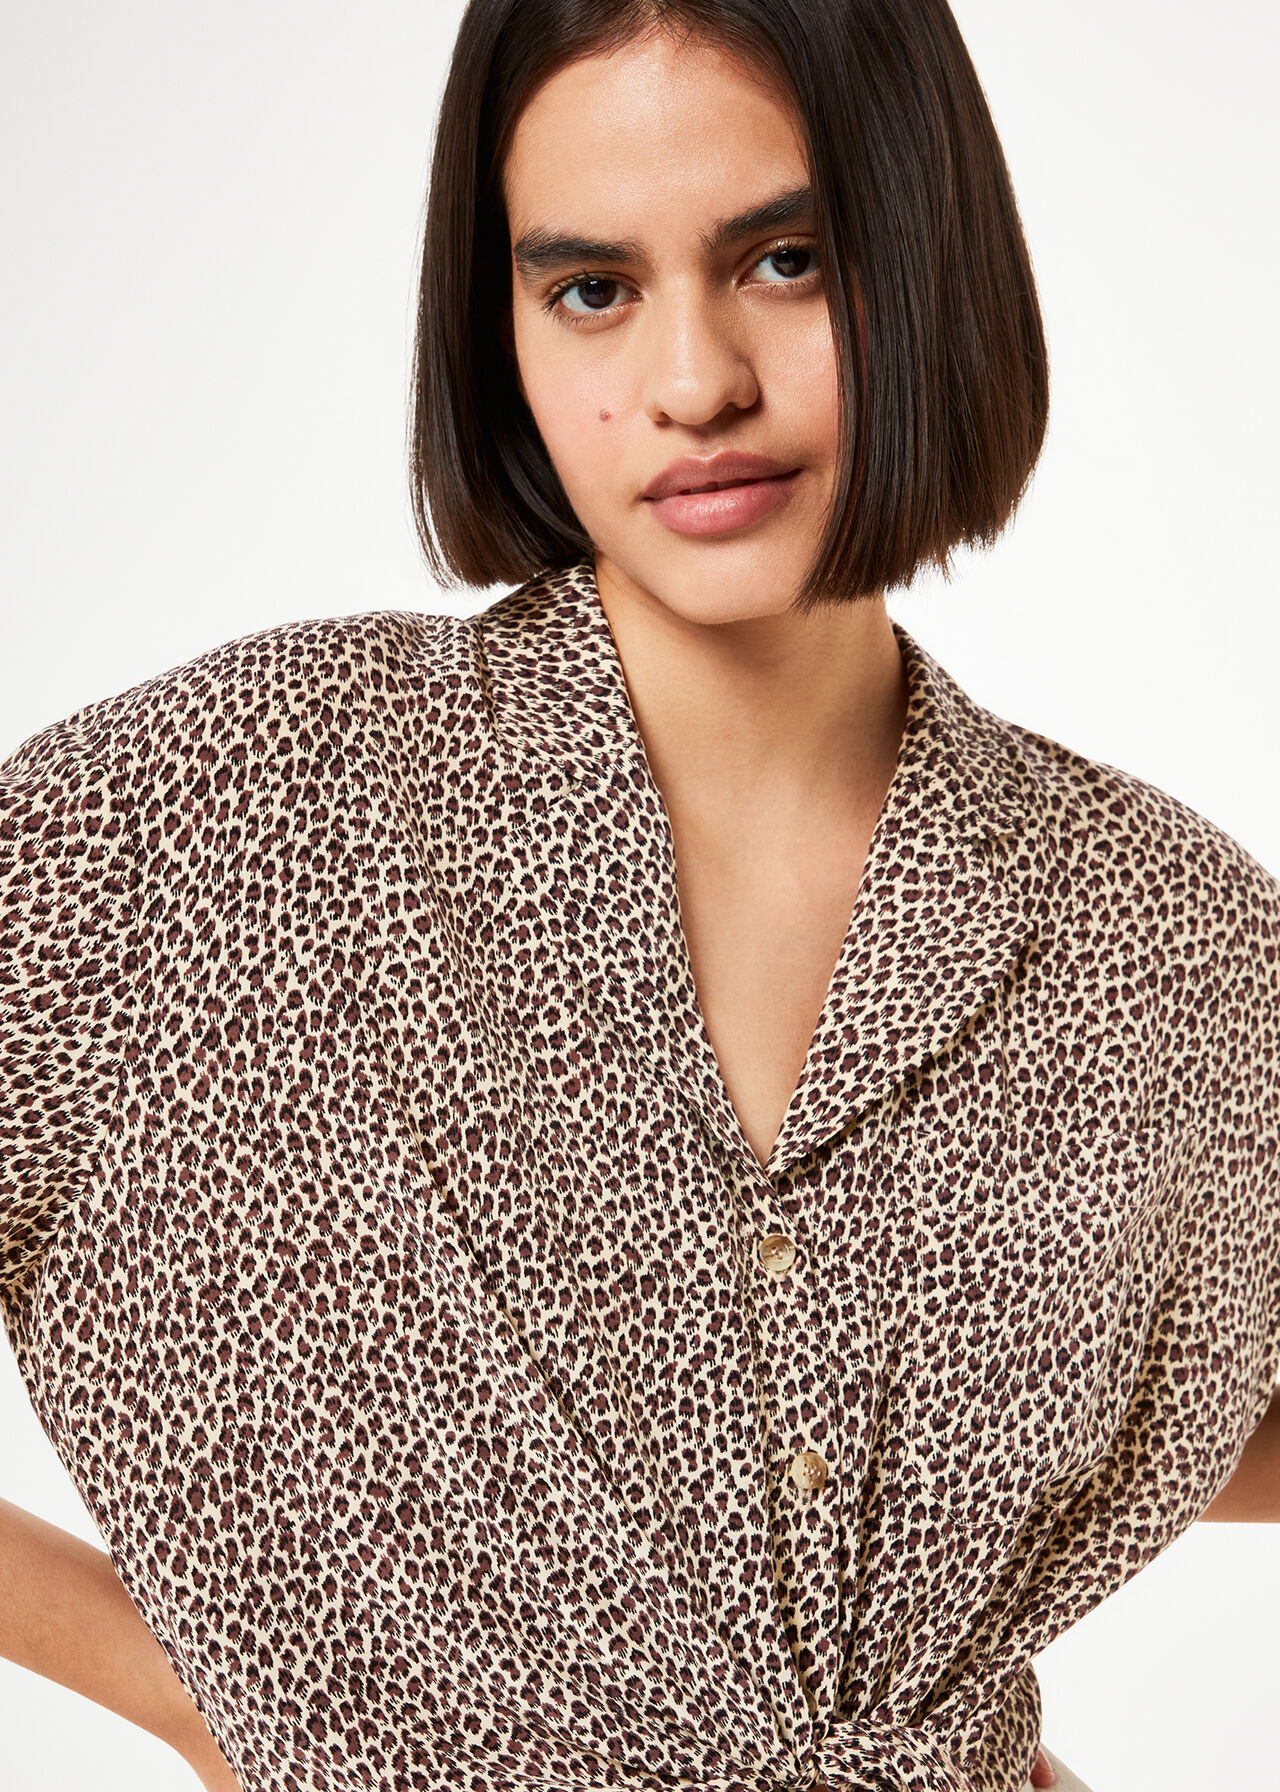 Dashed Leopard Tie Front Top